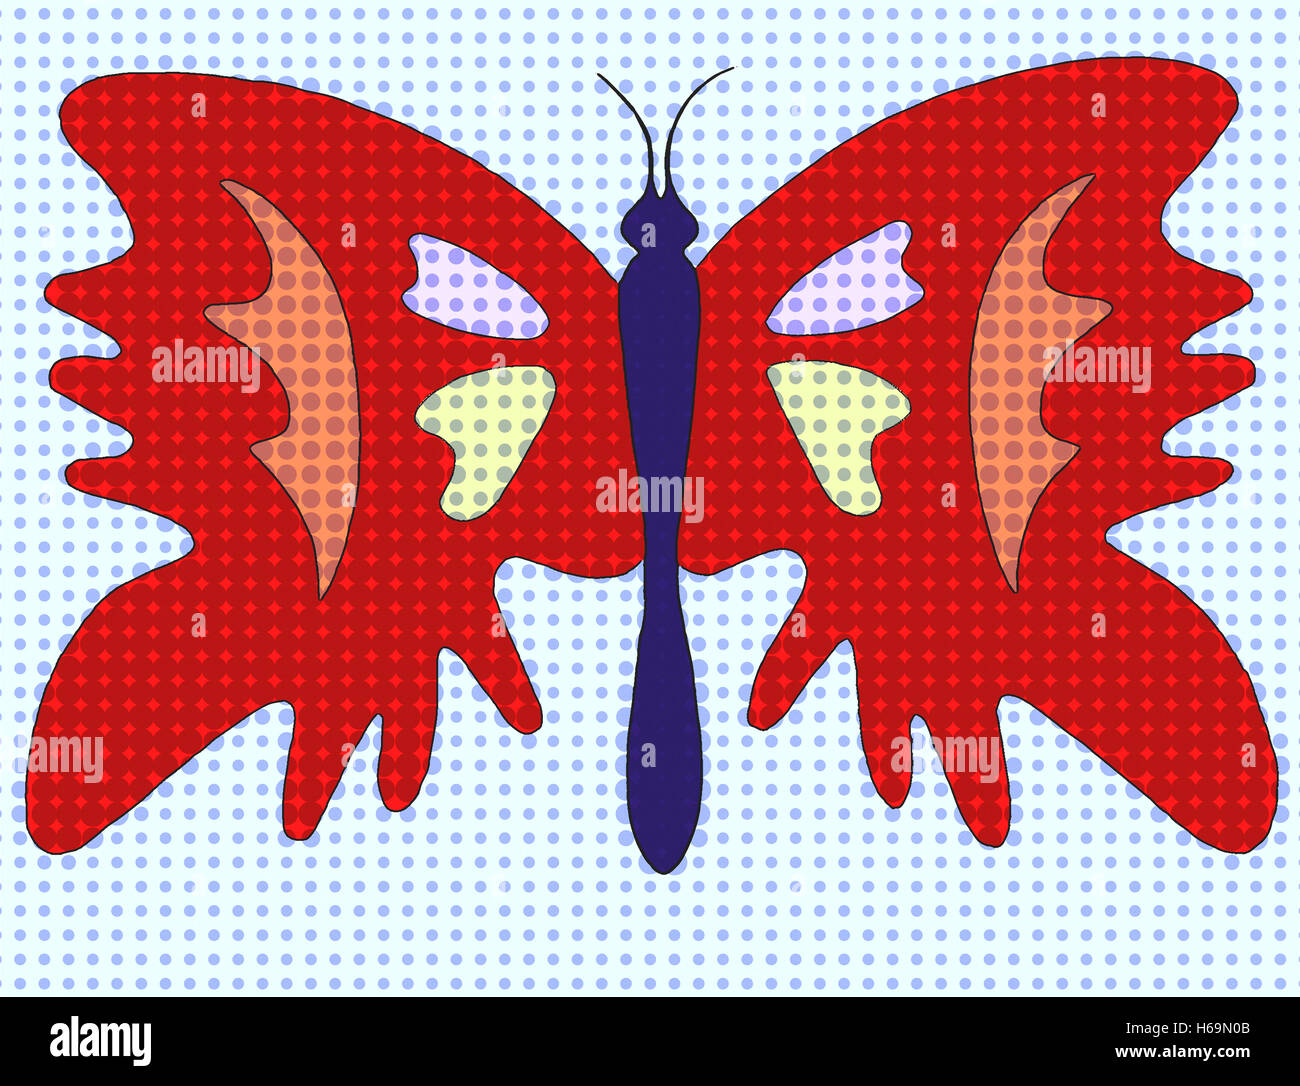 insectThe butterfly image expressed here as symbol of transformation and the spirits through many forms. Stock Photo